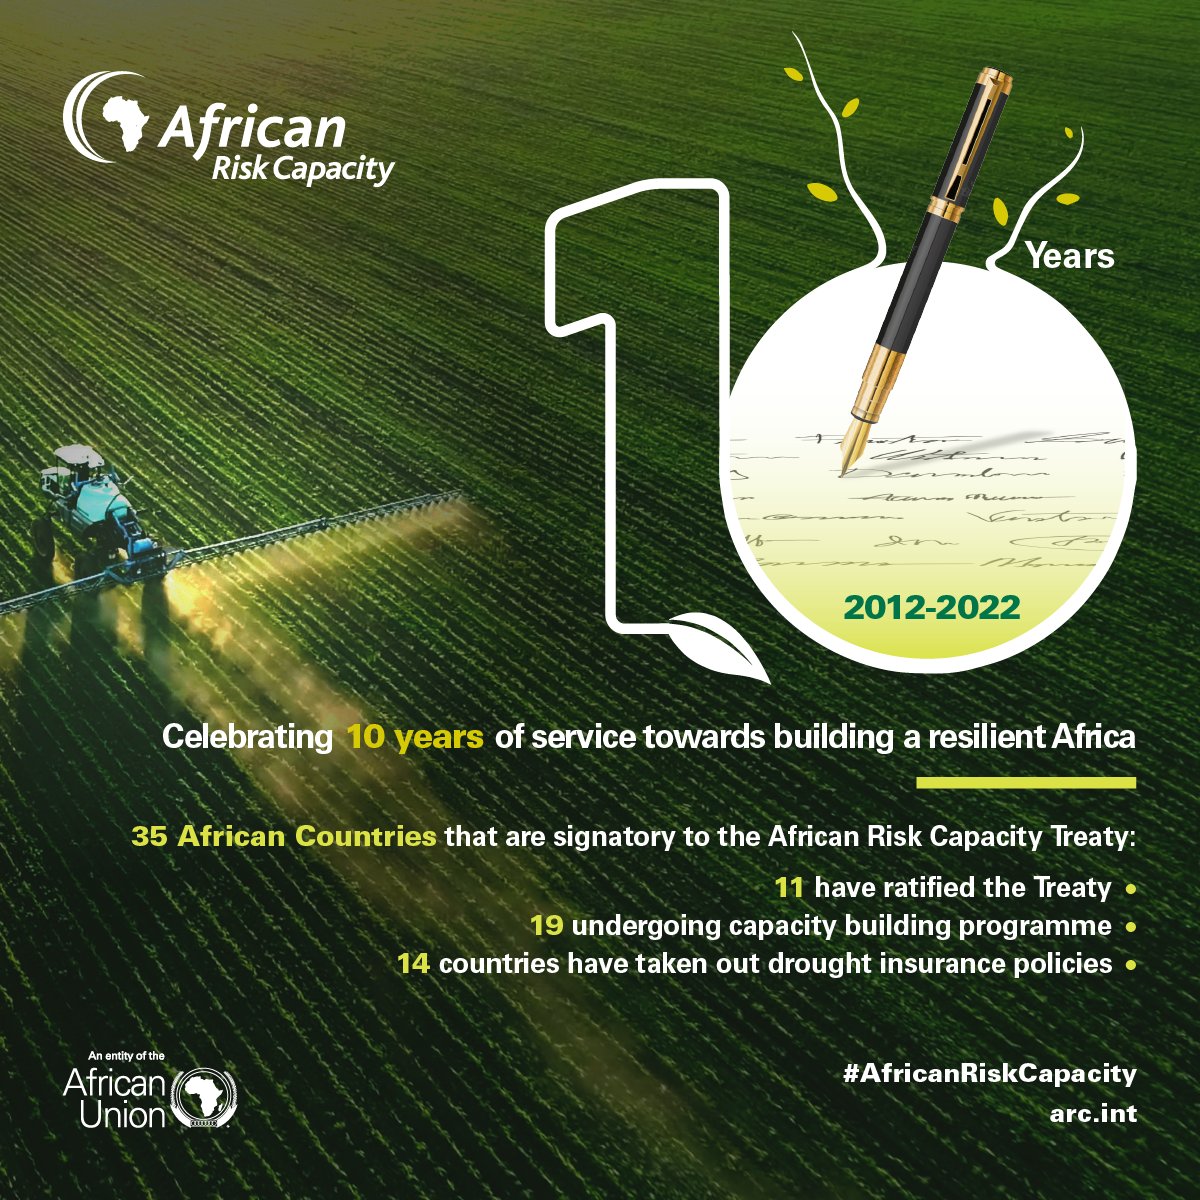 To date, 35 African countries have signed the ARC Foundation Treaty, giving them access to ARC solutions: - 11 have ratified the Treaty - 19 are undergoing capacity building programme - 14 countries have taken out drought insurance policies #AfricanRiskCapacity #10years